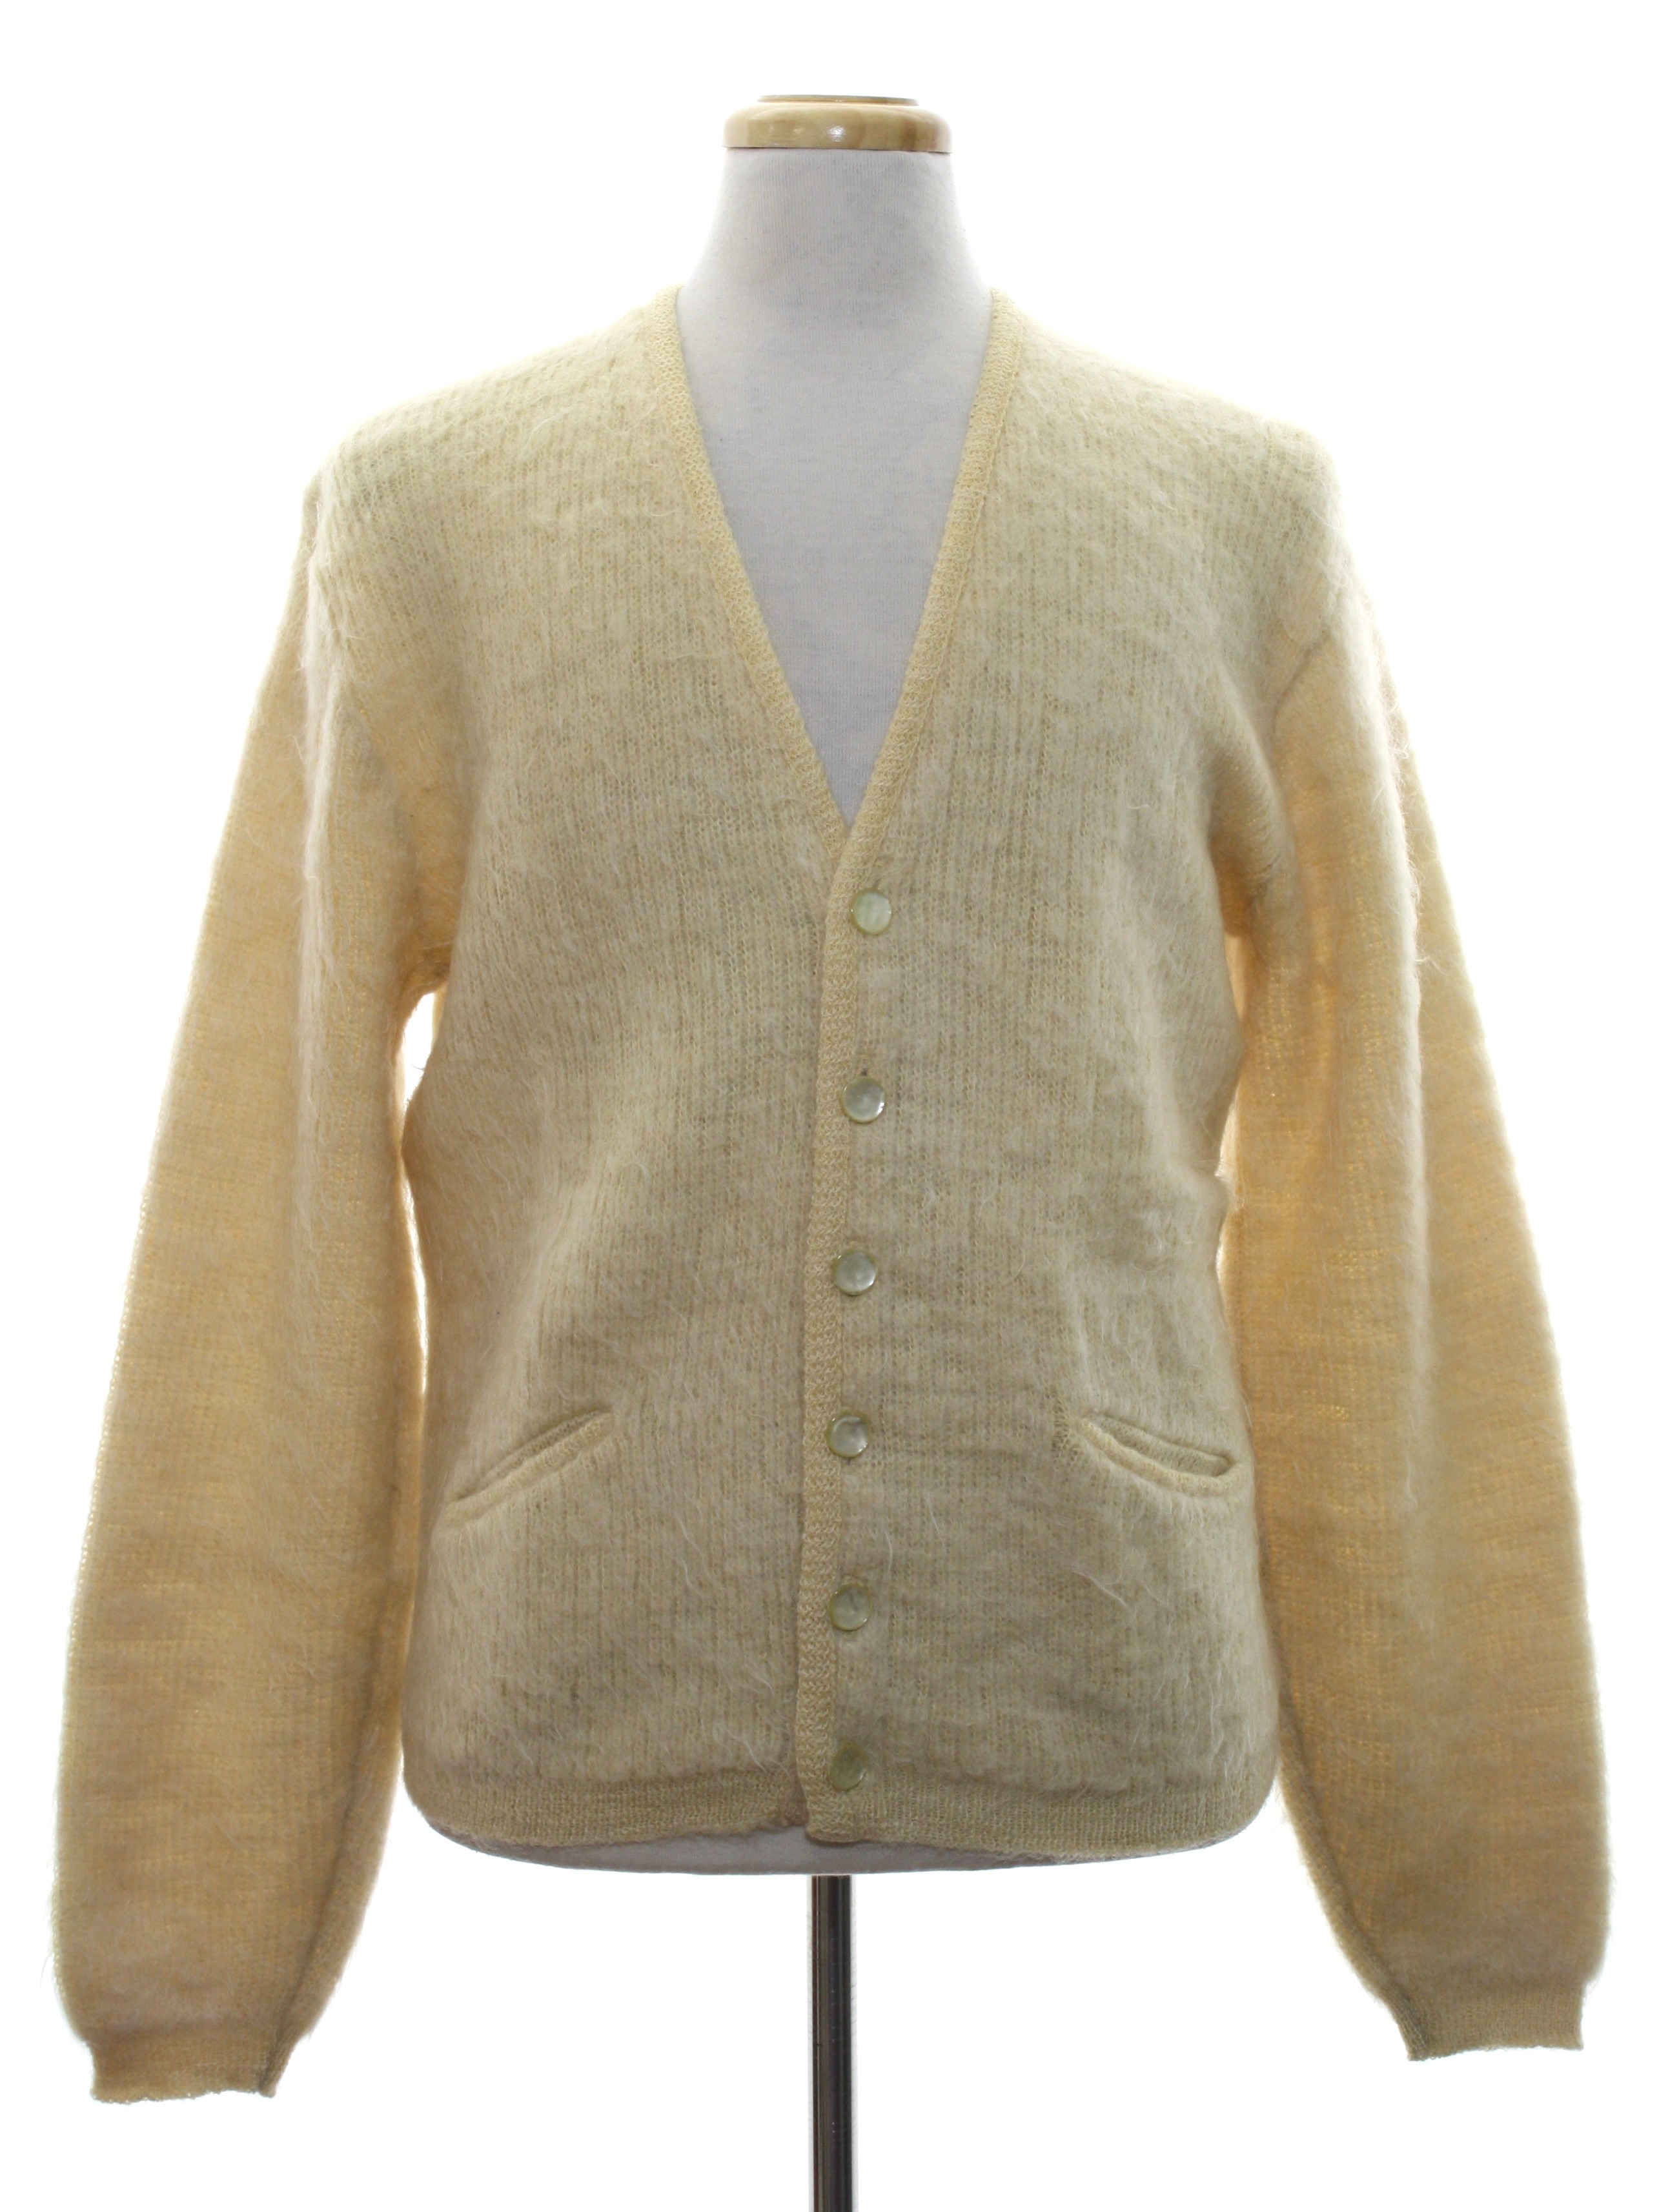 Shaggy Man Drummond Fifties Vintage Caridgan Sweater: Late 50s or Early ...